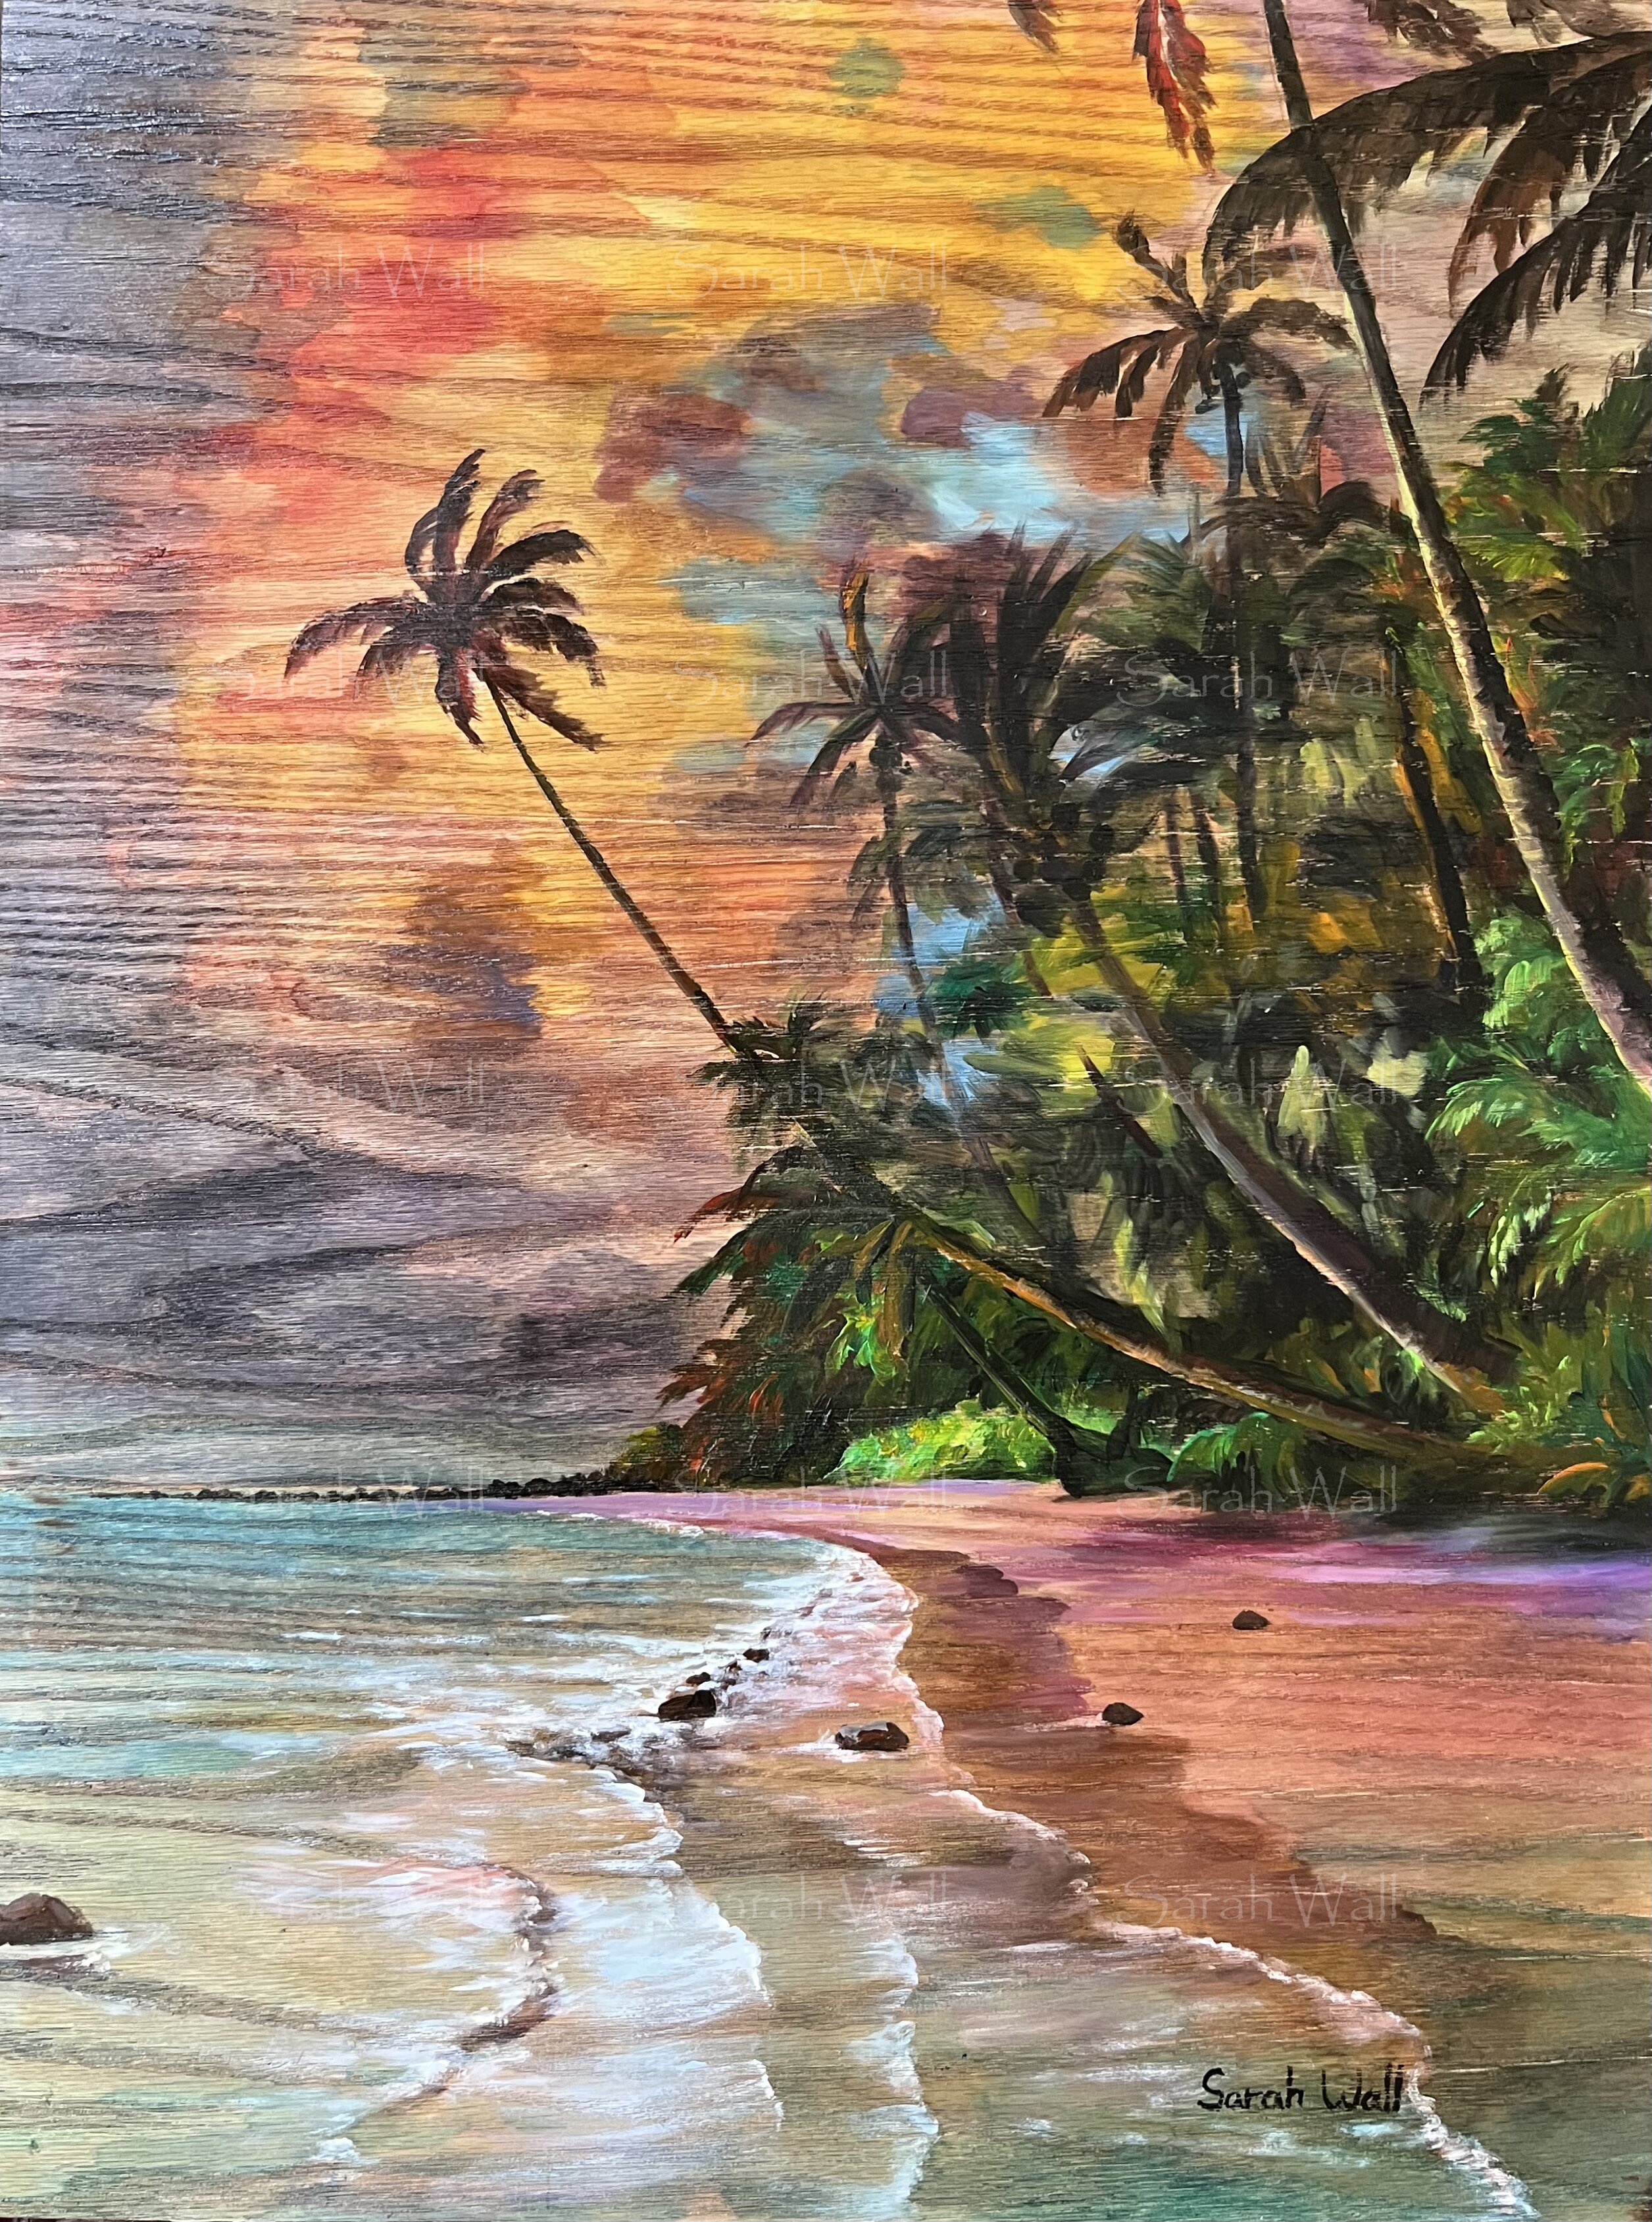 Sarah Wall; Out Of The Jungle, 2022, Original Painting Oil, 20 x 24 inches. Artwork description: 241 Beautiful tropical beach palm trees seascape sunrise ...